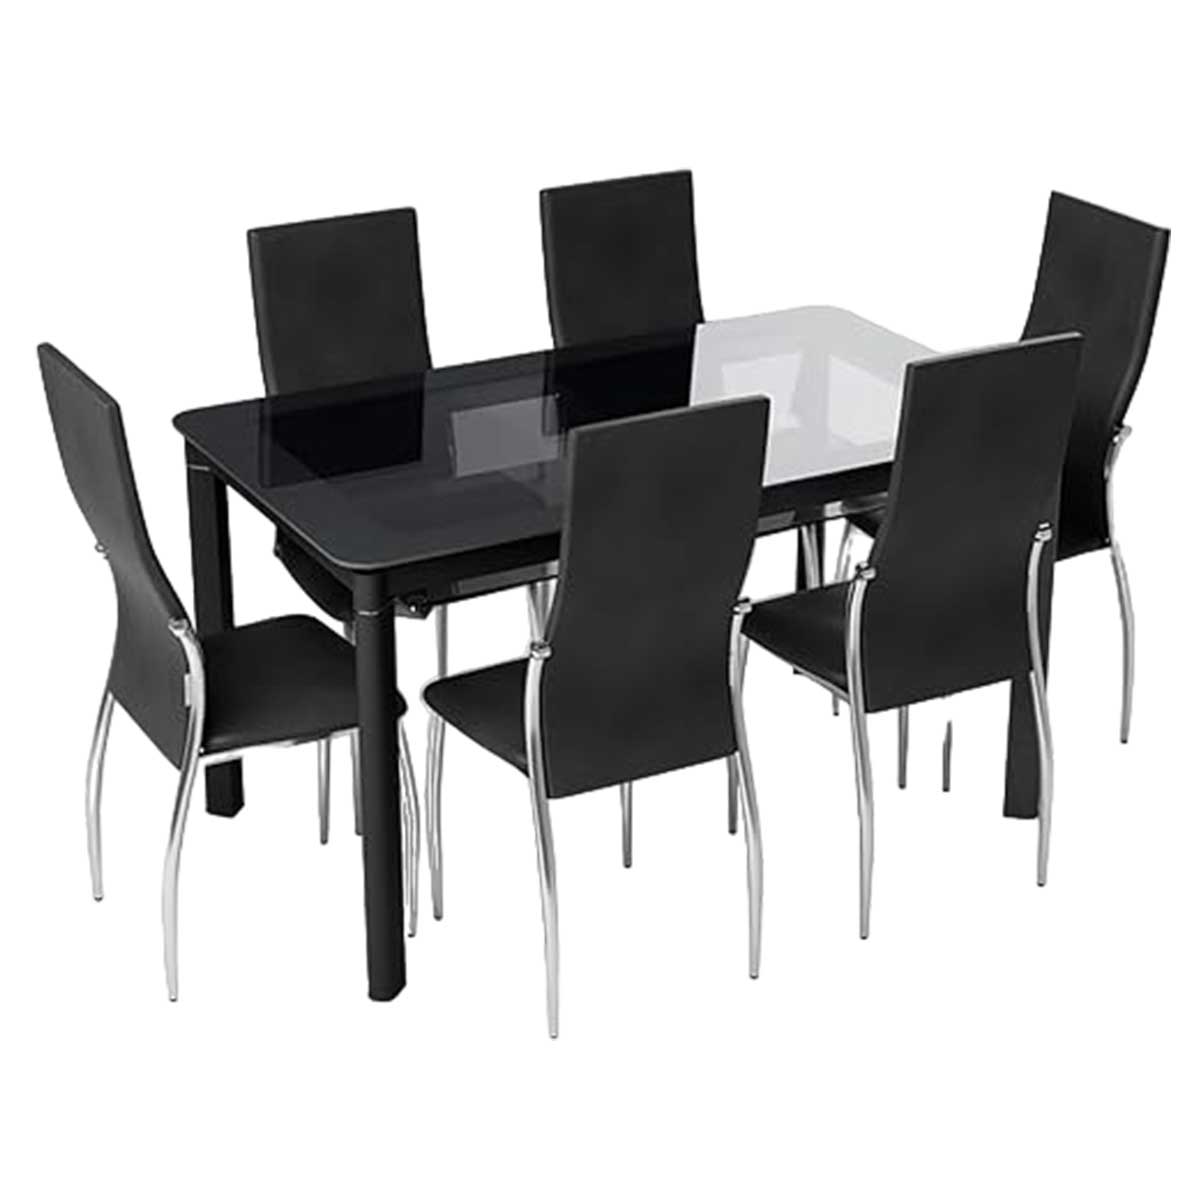 Cafeteria Furniture Set Manufacturers, Suppliers in Rohini Sector 8